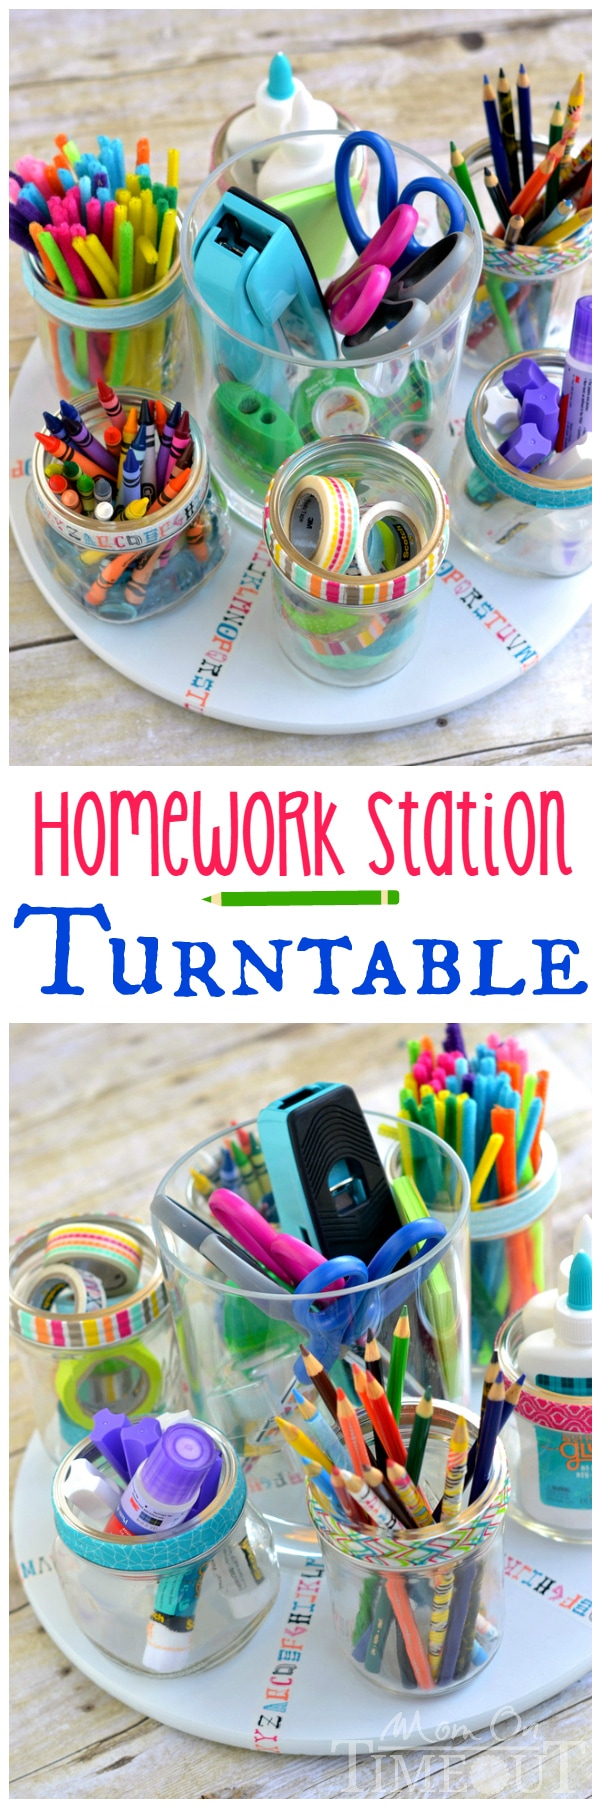 Children's Art & Homework Station – How To Display Their “art” - Our  Thrifty Ideas